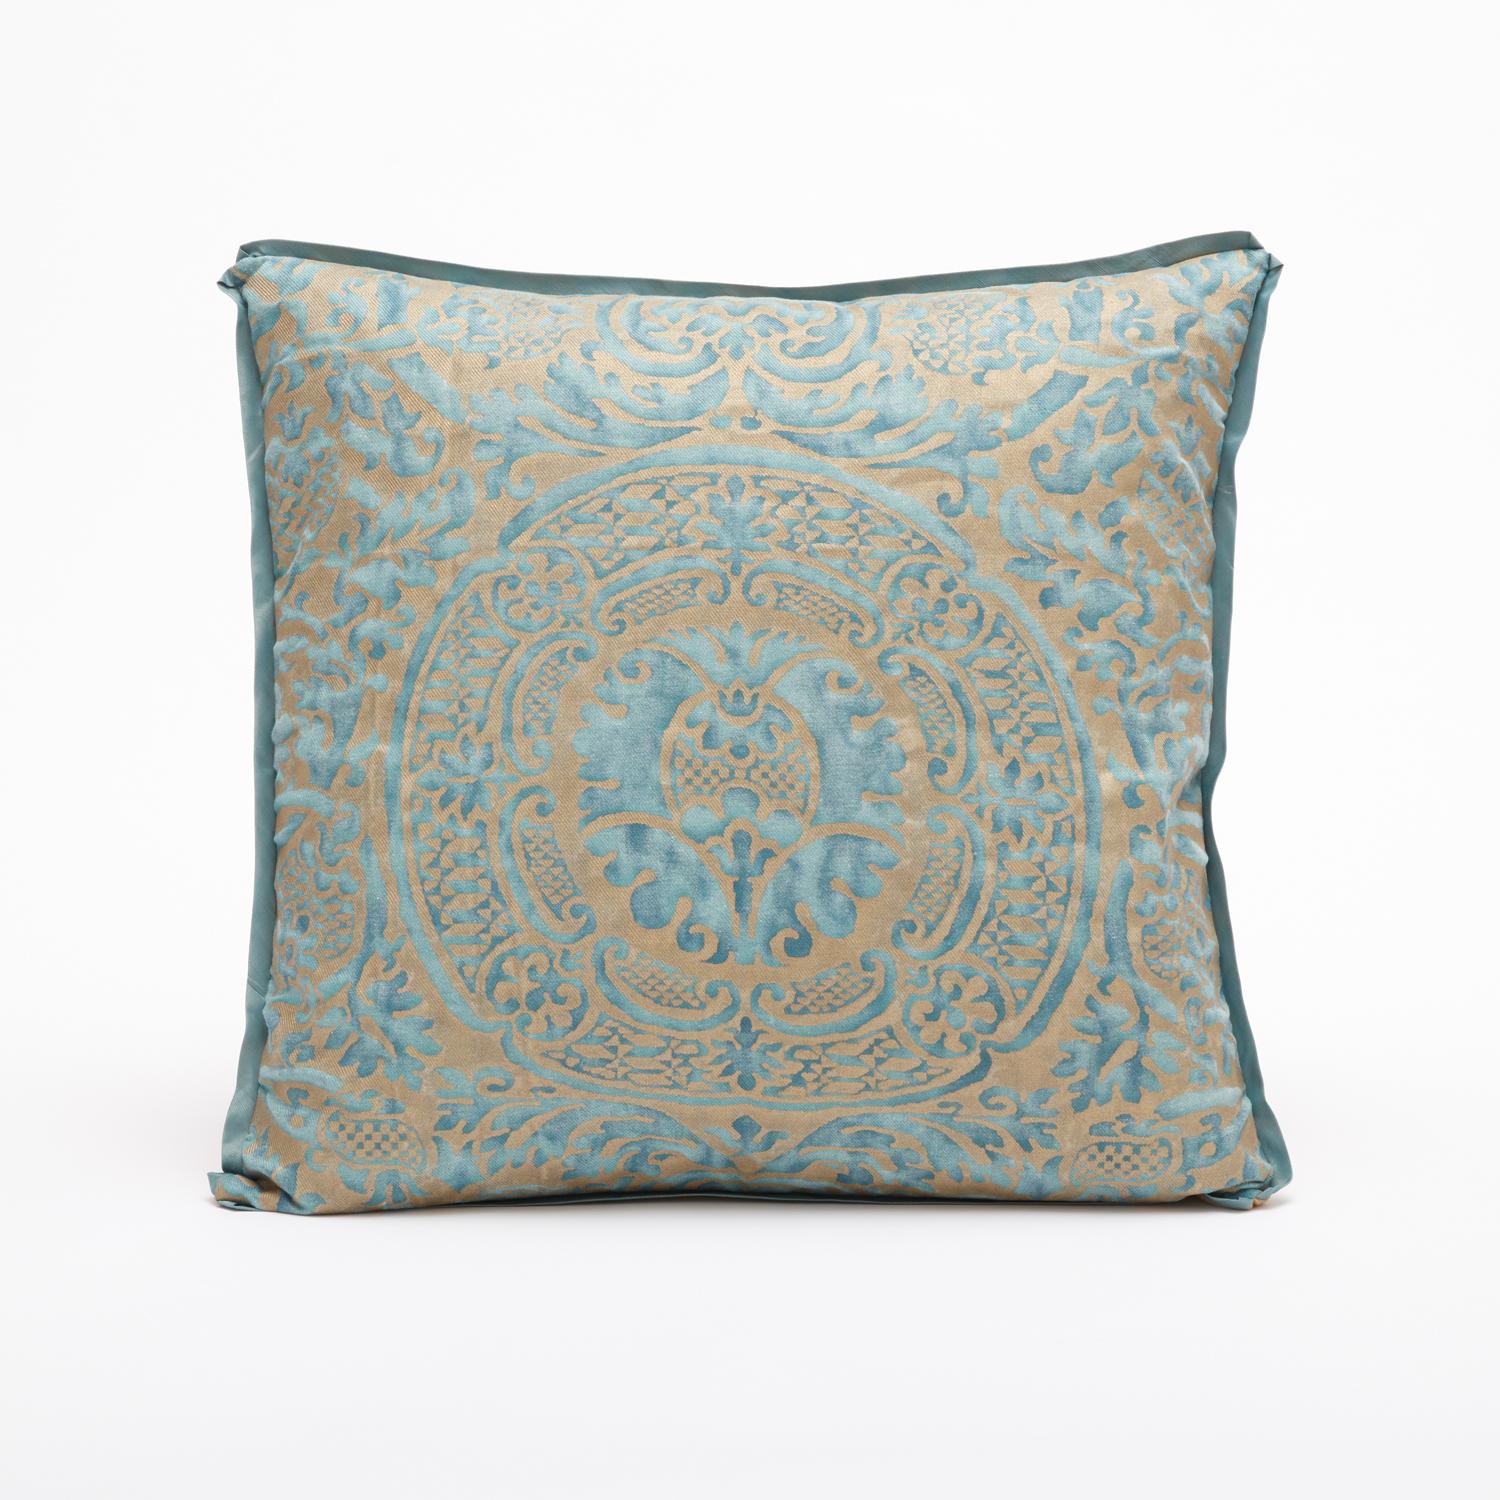 A Fortuny Fabric Cushions in the Orsini Pattern